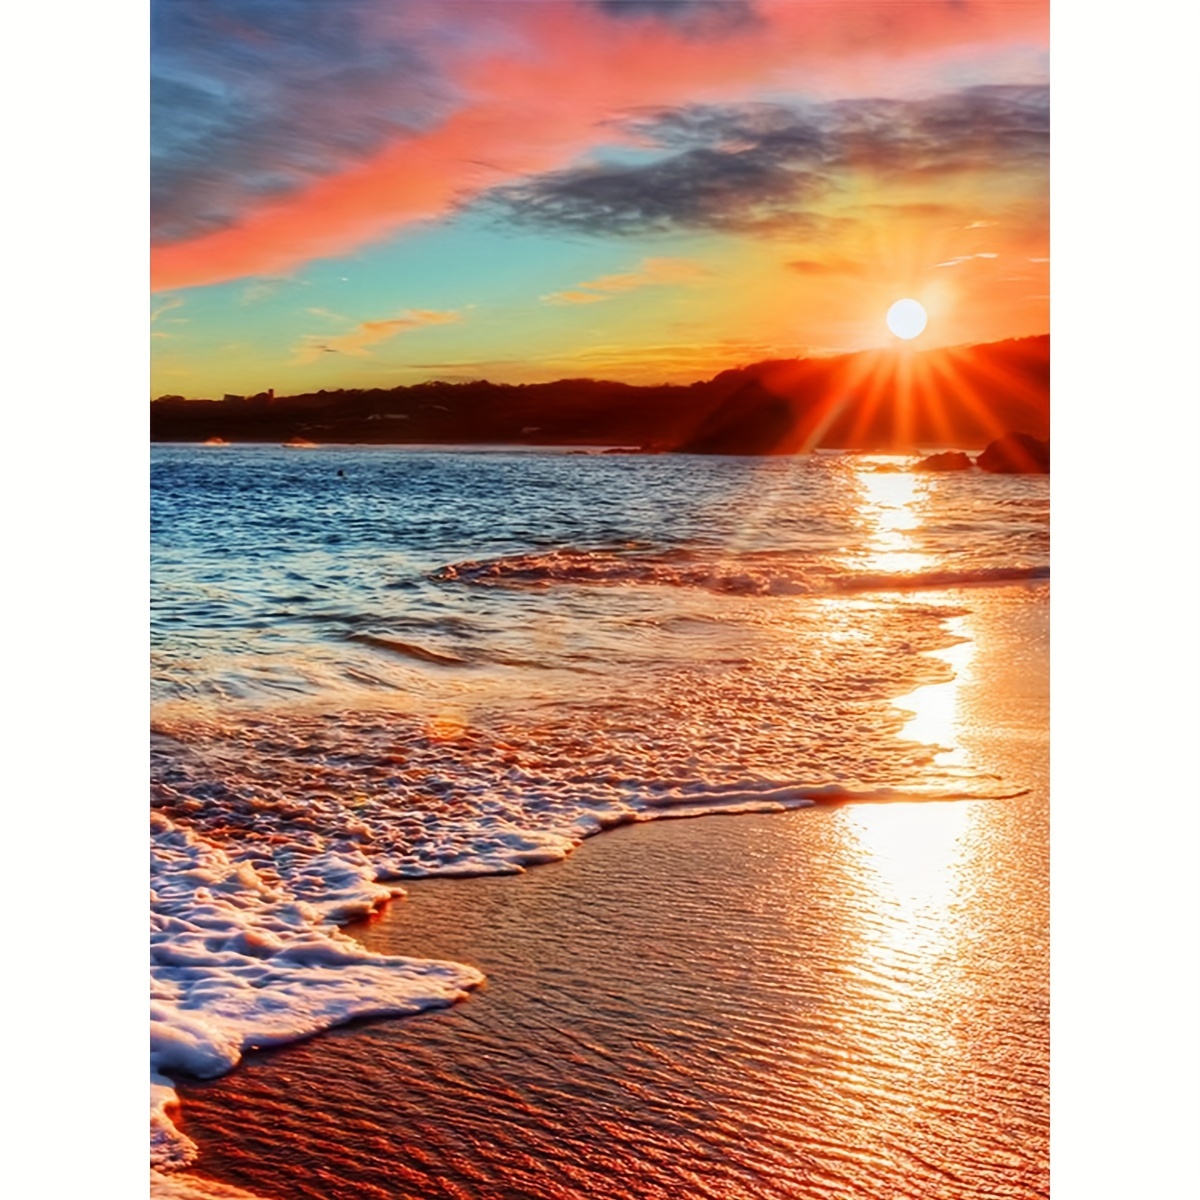 

Sunset Beach Seascape Acrylic Paint By Numbers Kit For Adults - Diy Frameless Canvas Painting Set For Home Wall Decor, Mosaic Art Gift, 30x40cm (11.8x15.7in), Pack Of 1